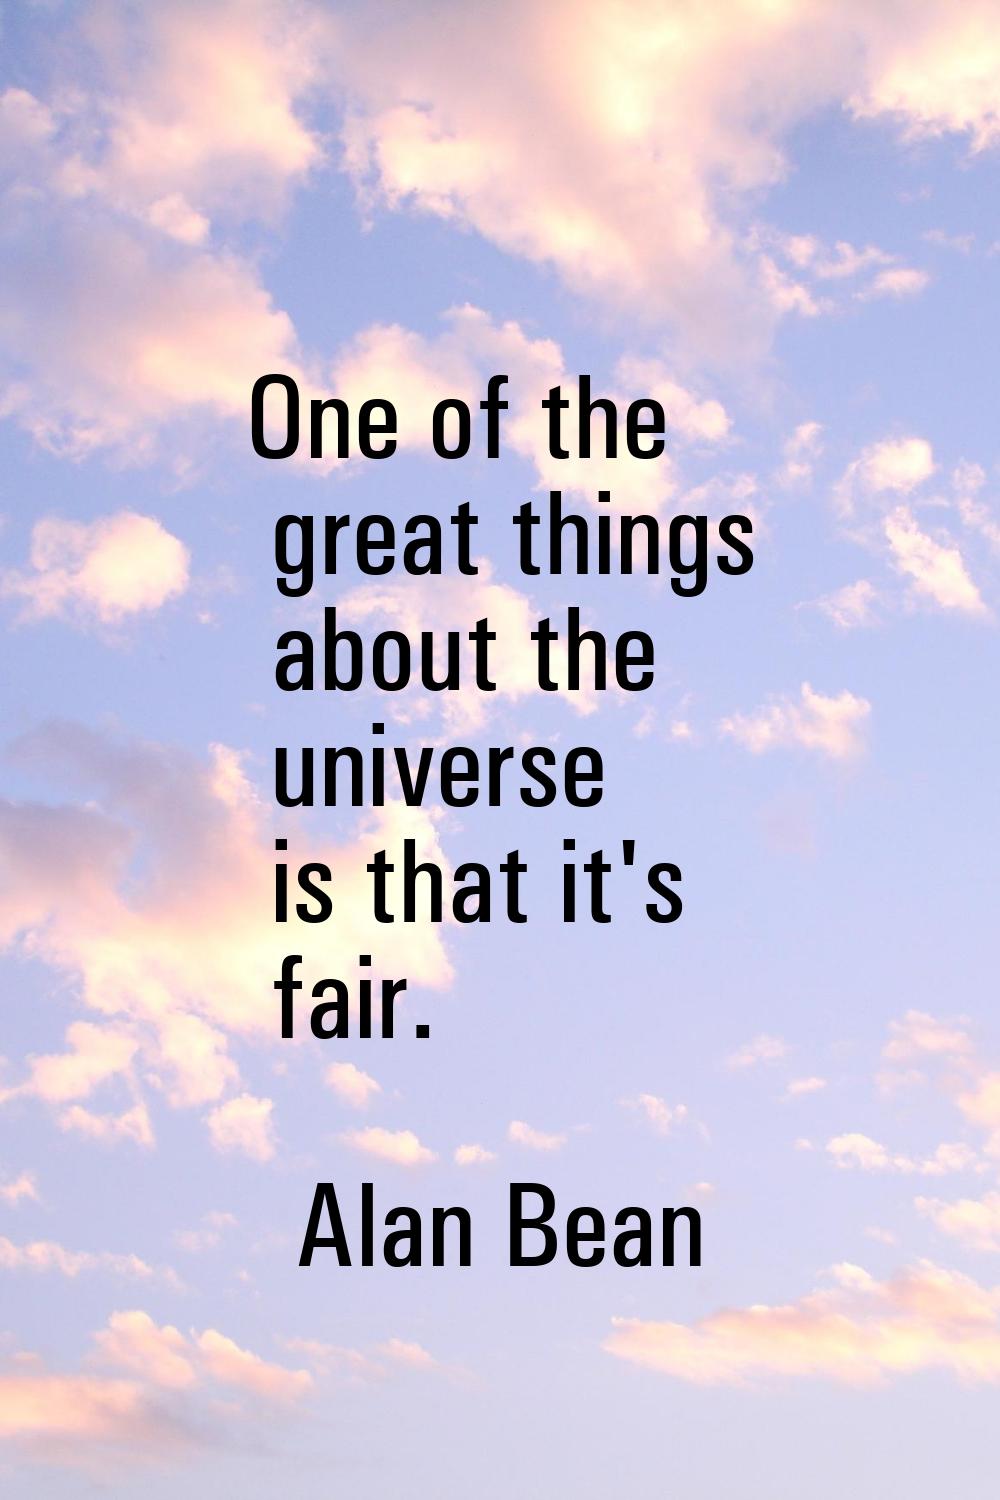 One of the great things about the universe is that it's fair.